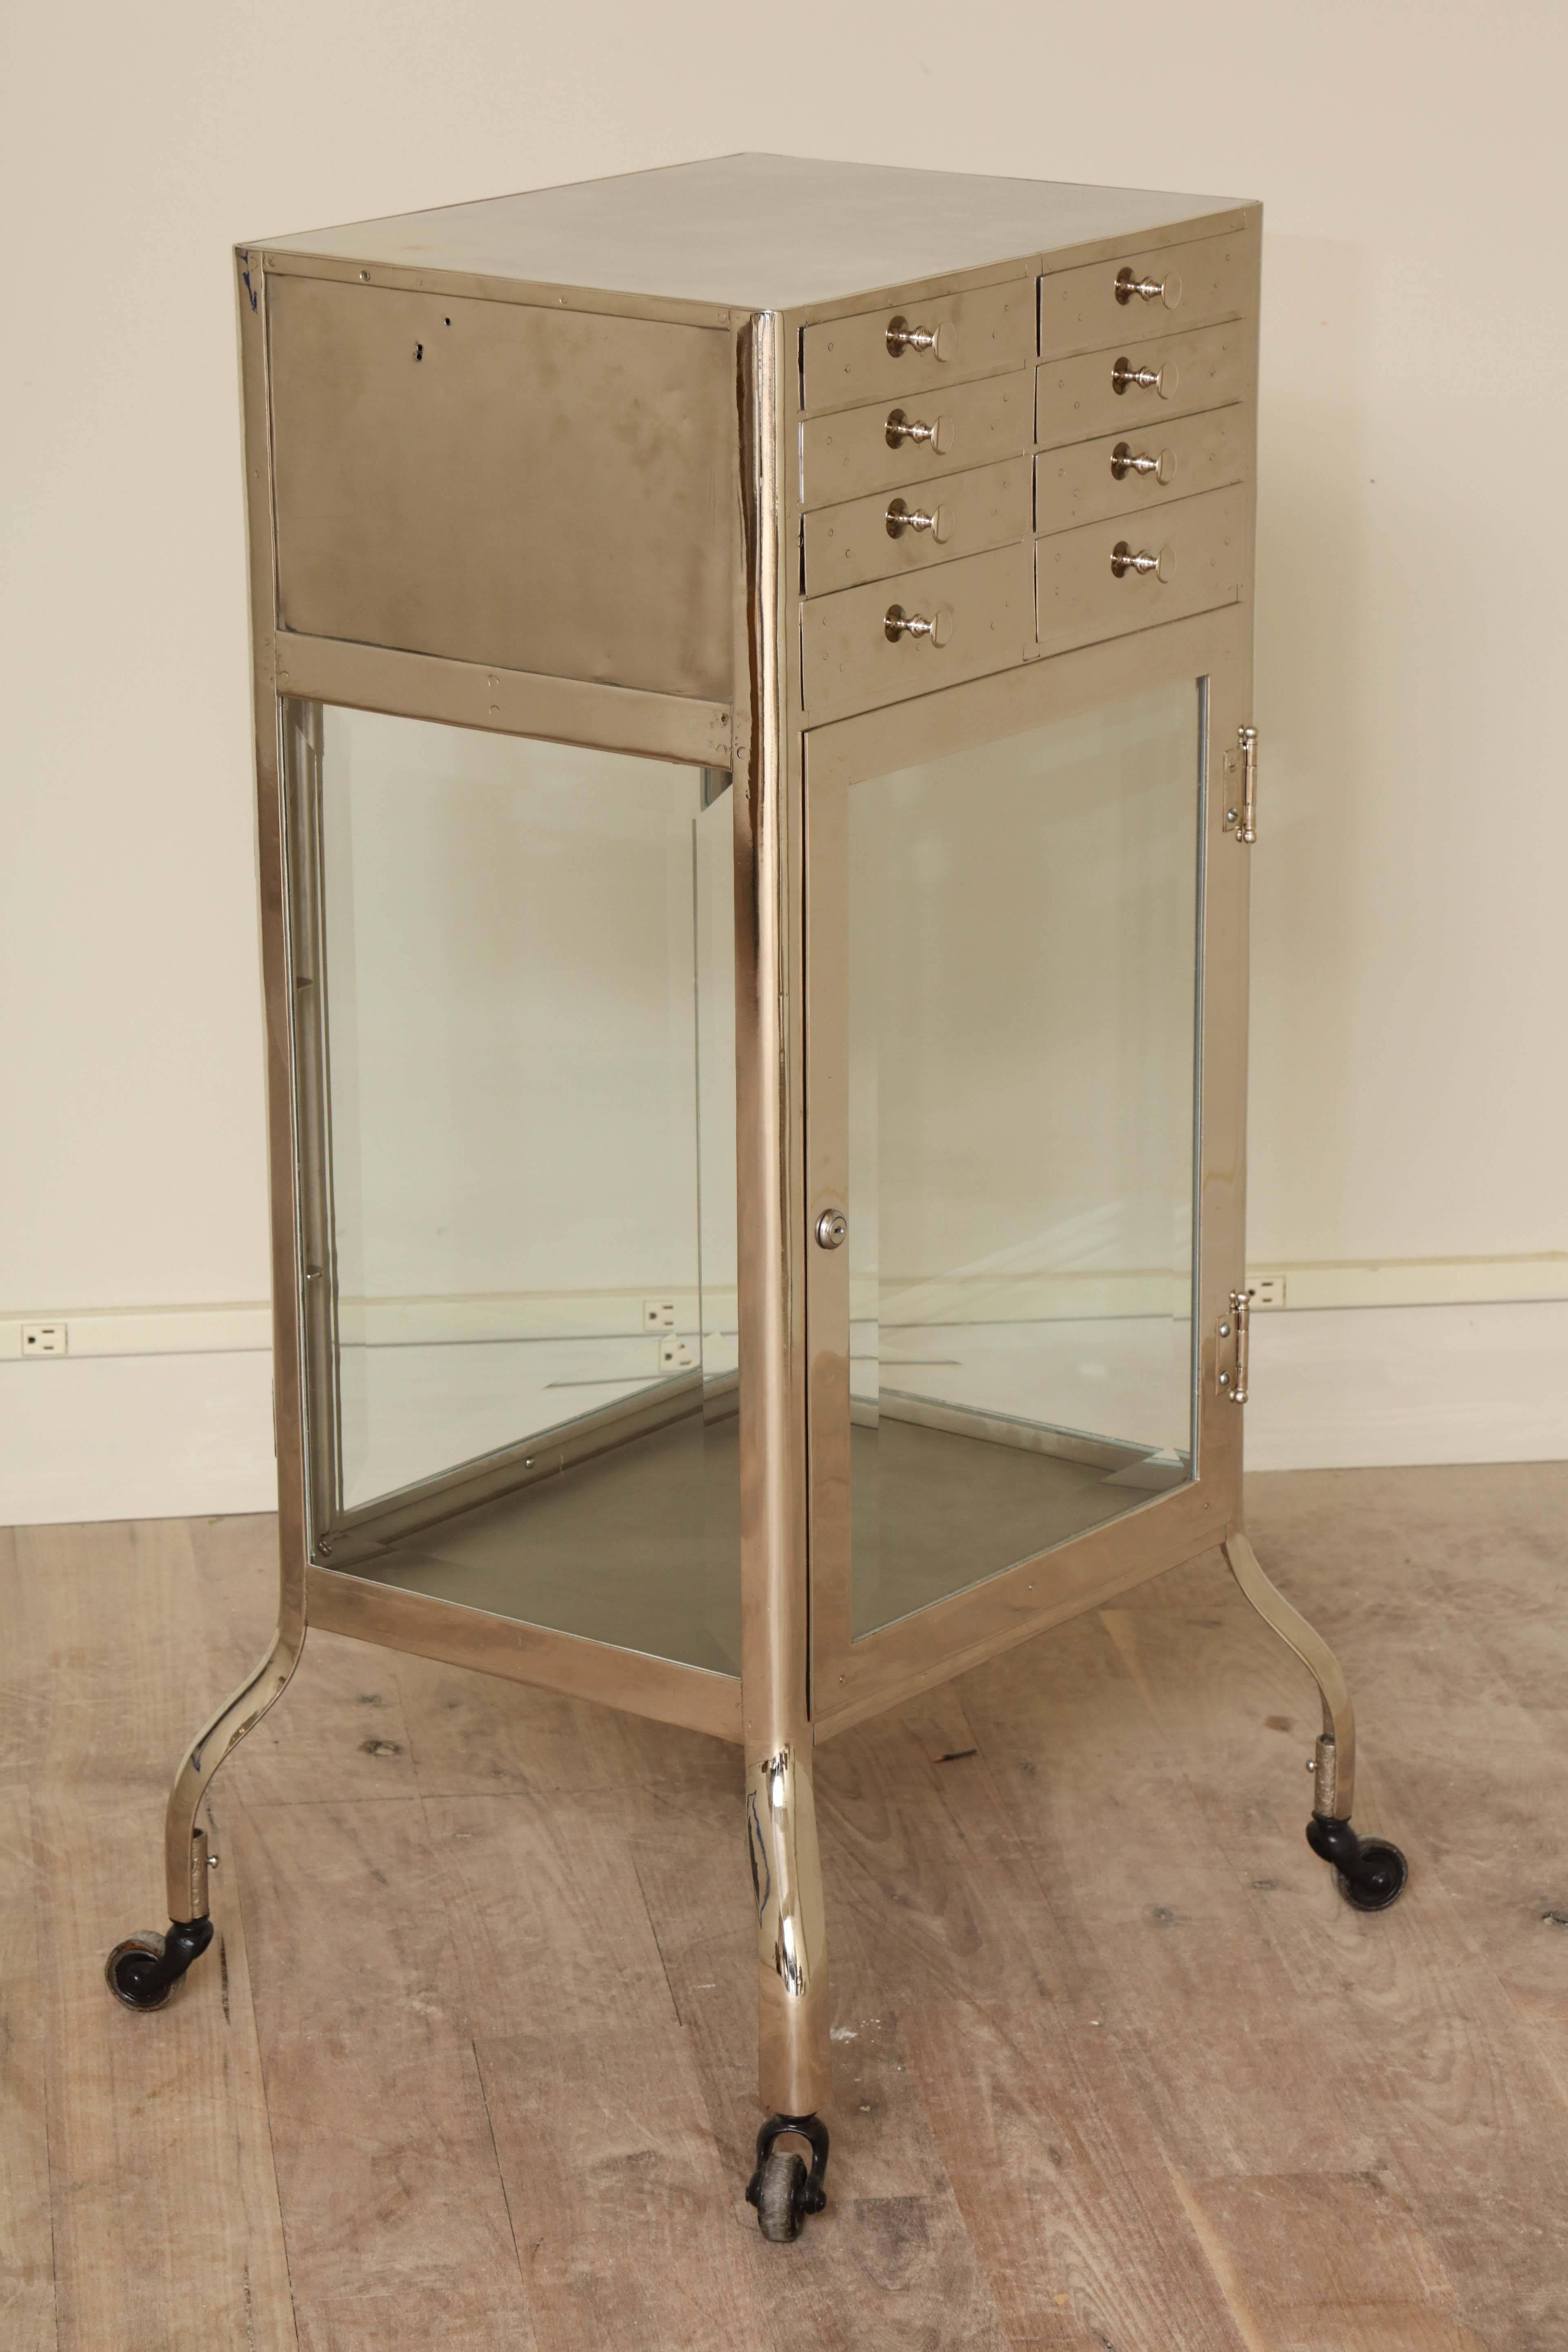 Chrome-plated Industrial cabinet with a bank of eight drawers over a double-sided locking cabinet with beveled glass shelves and doors, circa 1940.